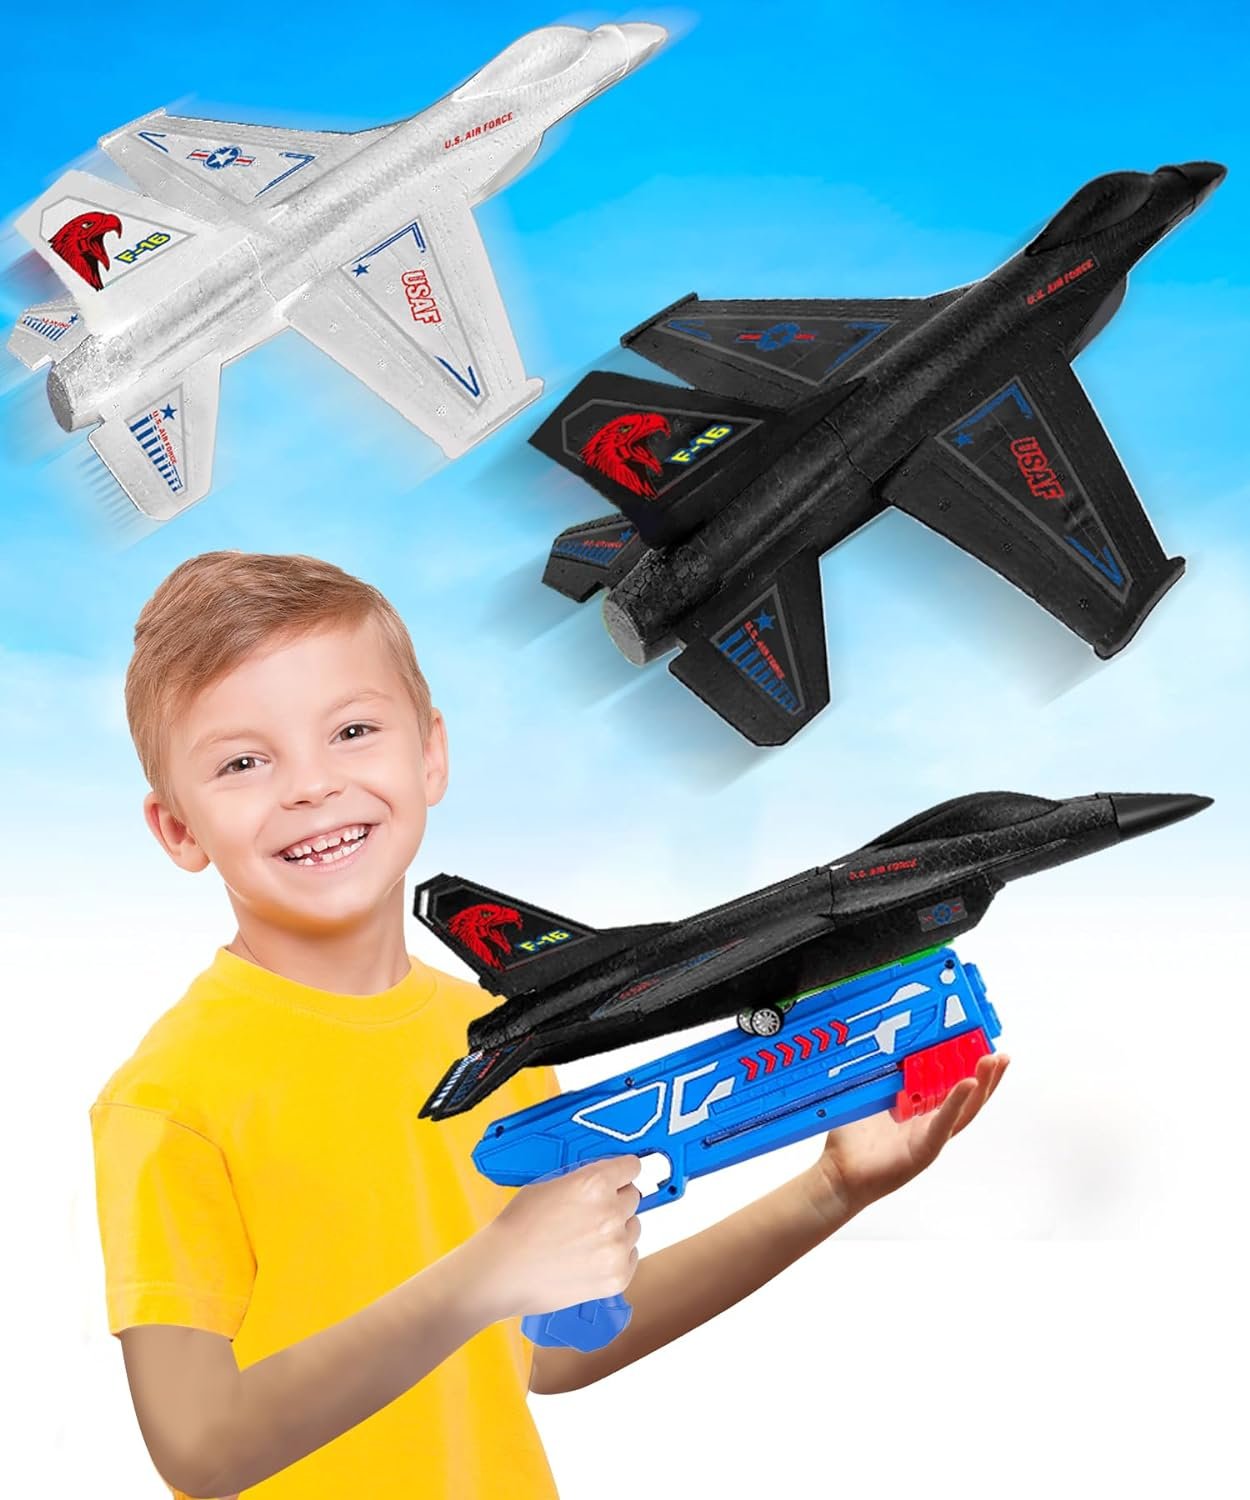 Airplane Launcher Toy Set – 2 F-16 Fighting Jets and 1 Airplane Gun - Plane Gun for Kids - Toys for High Flying Fun - Backyard Outdoor Toys for Kids Ages 3 4 5 6 7 8 9